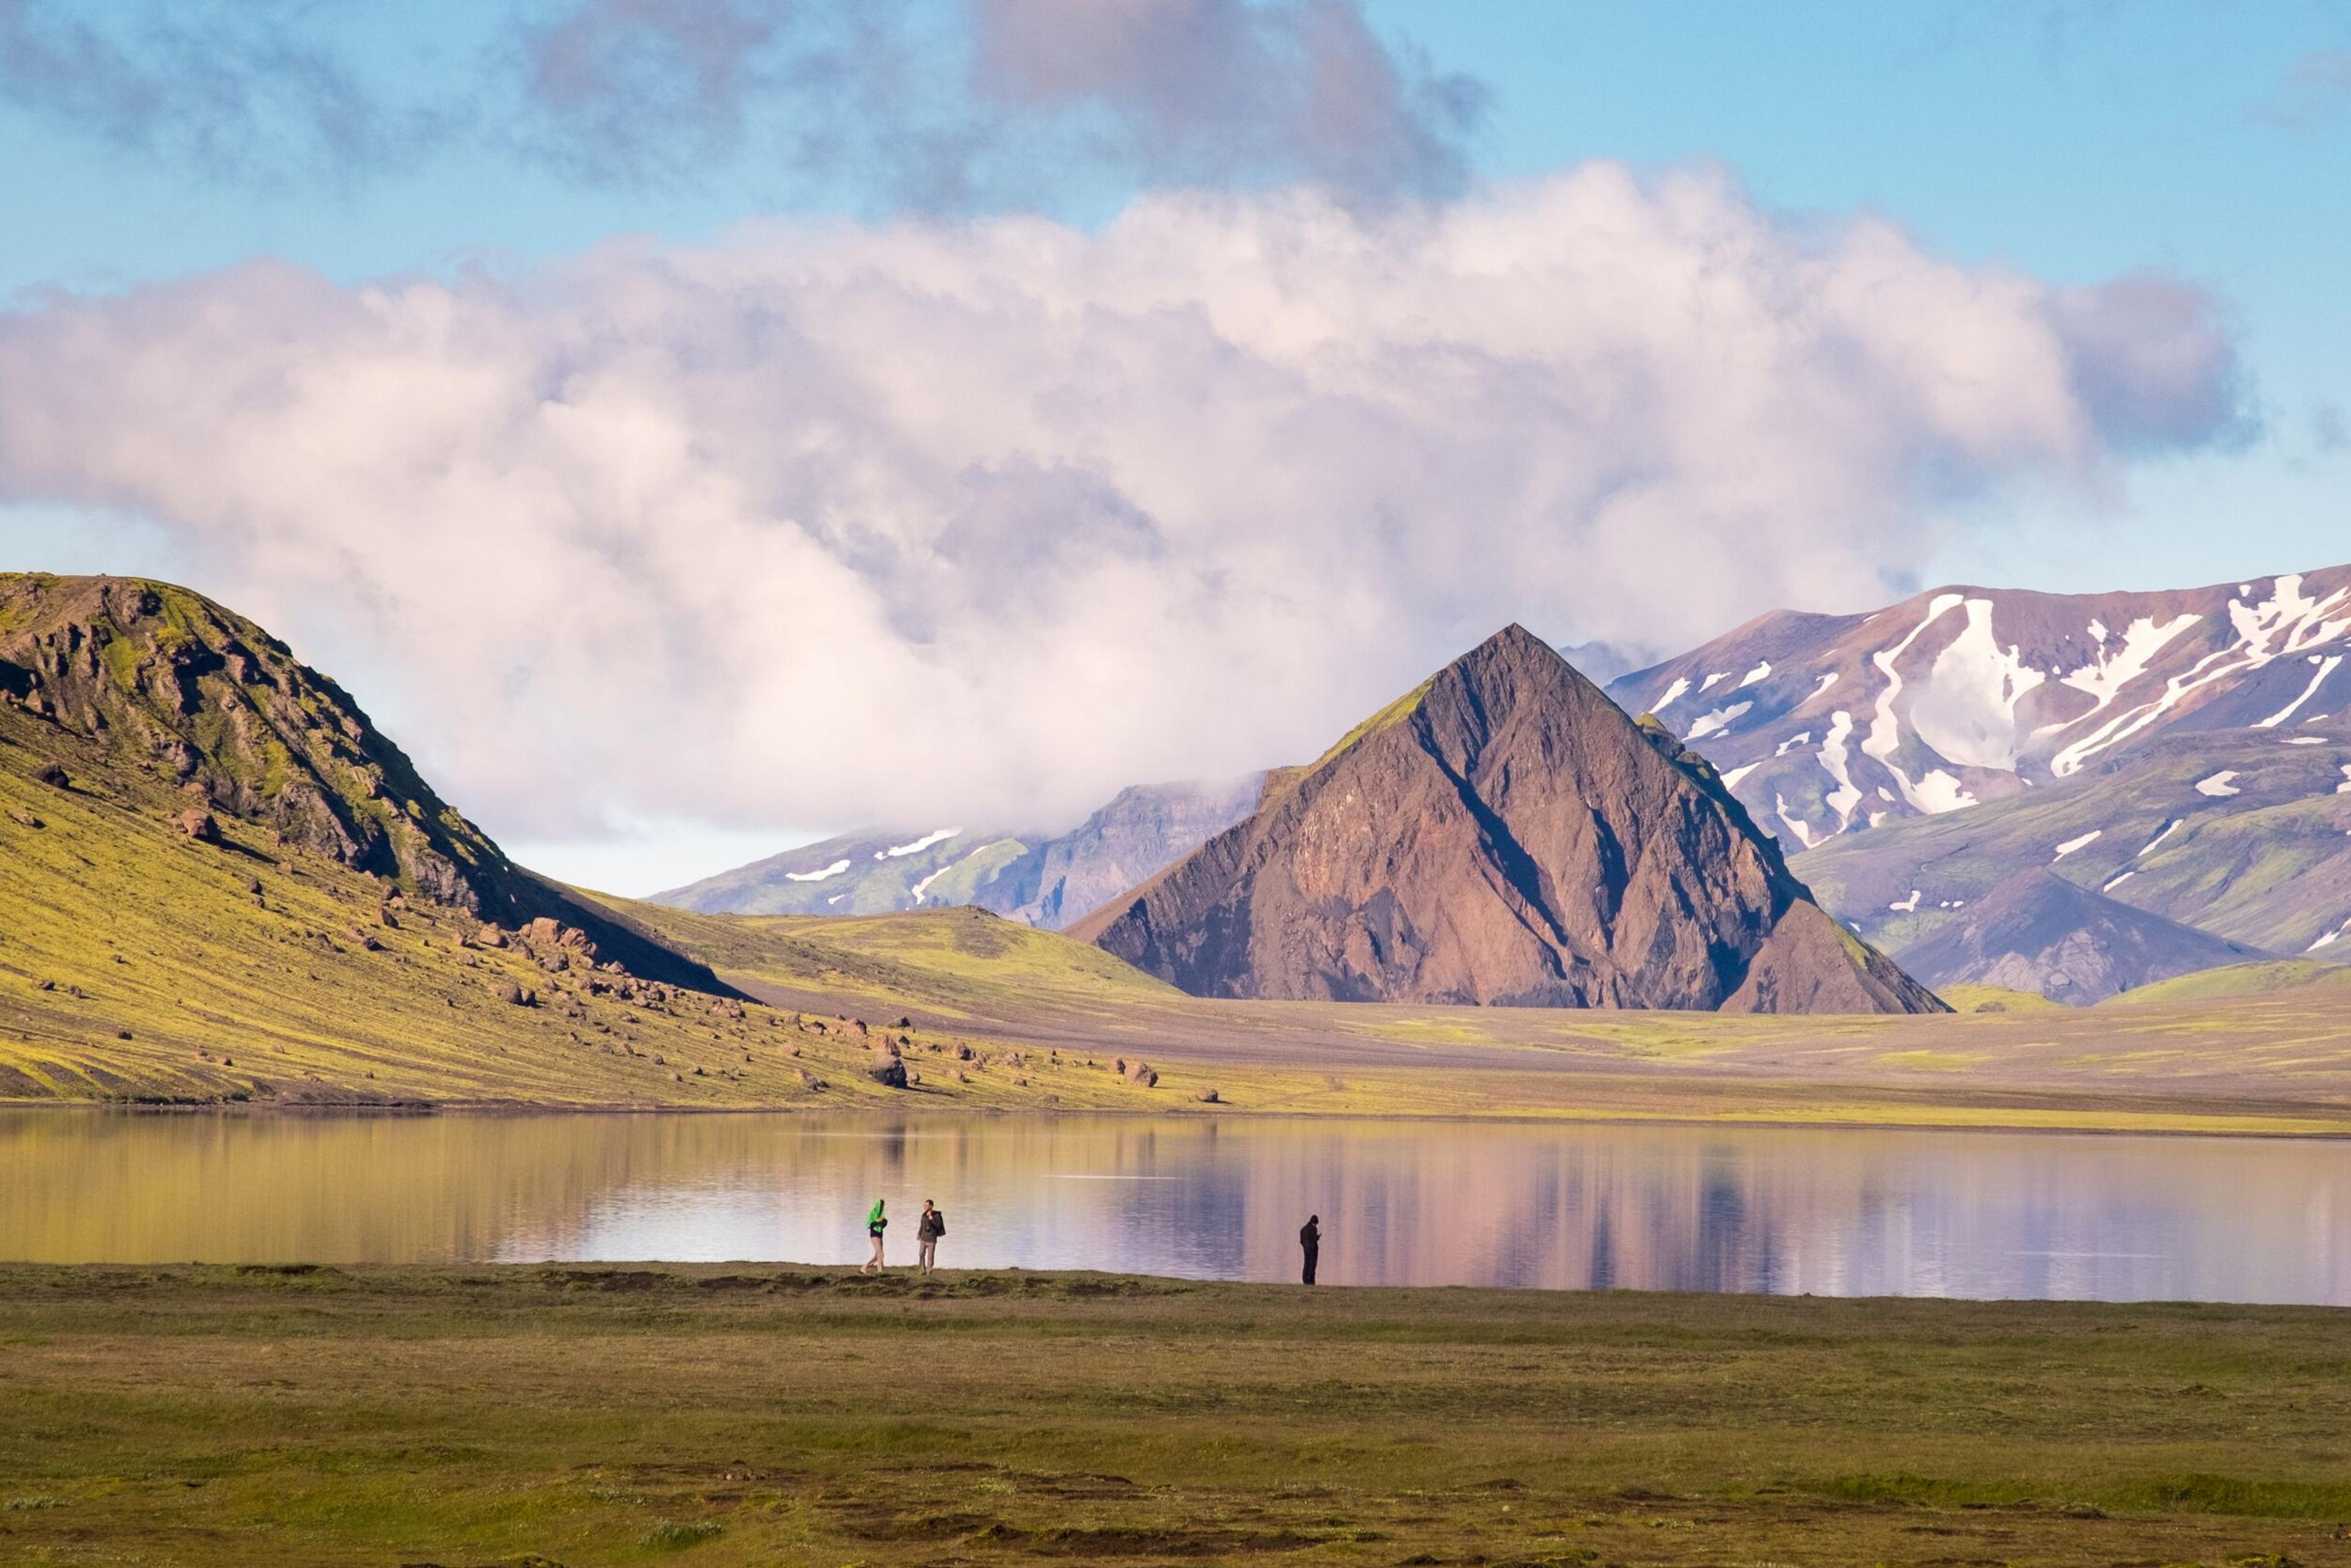 Hikers amidst a serene natural landscape, with a tranquil lake and a prominent mountain rising in the background.